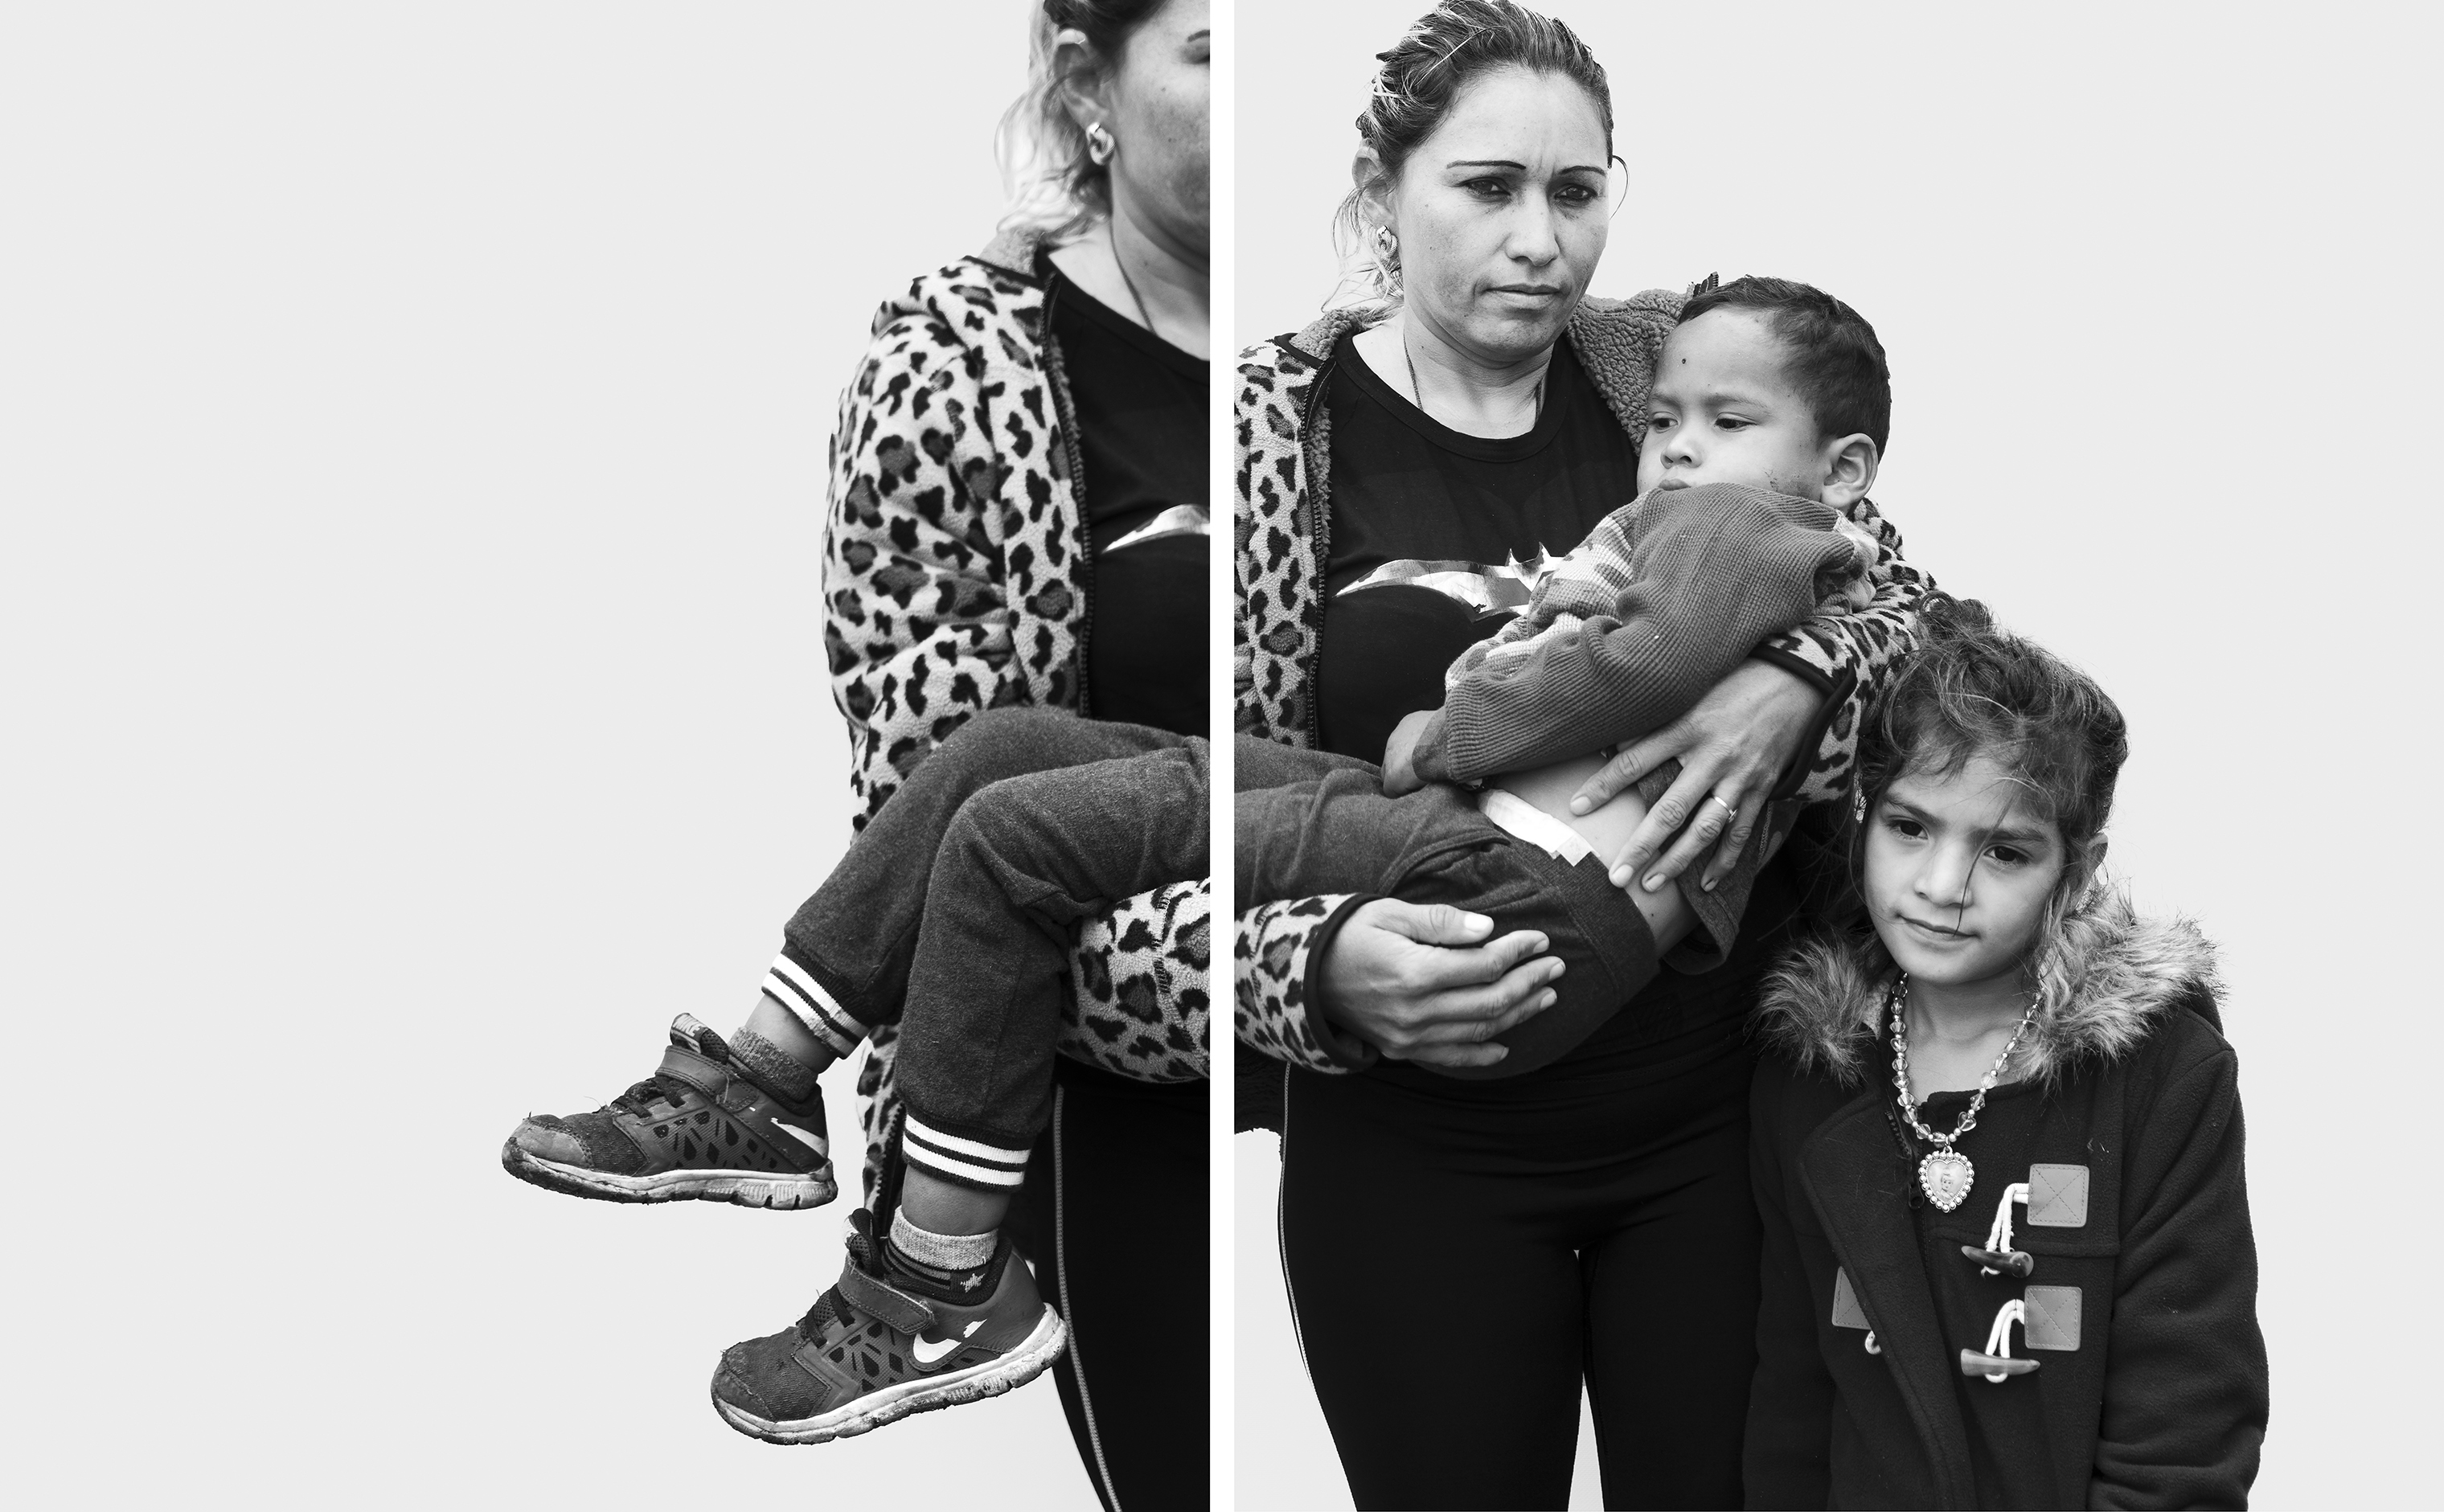 Merlin Alfaro, 31, and her children, José Luis Guevara, 3, and Maydelin Guevara, 7, traveled from their home in Honduras to Tijuana, Mexico, at the southern U.S. border with a migrant caravan in late 2018 (Davide Monteleone for TIME)